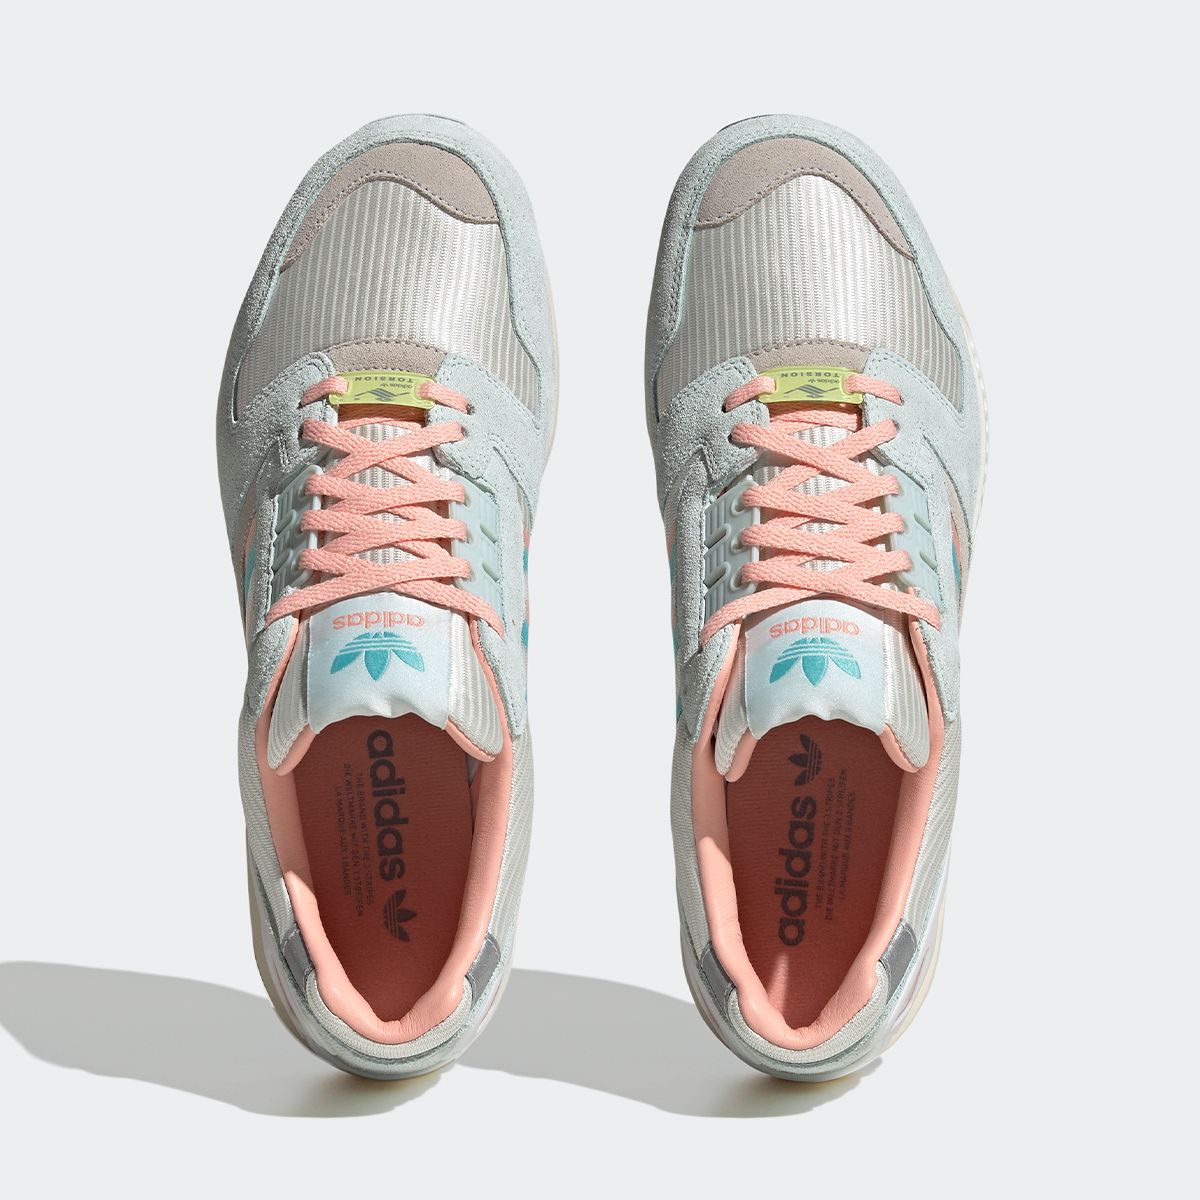 The adidas ZX 8000 “Ice Mint” is On the Way | House of Heat°